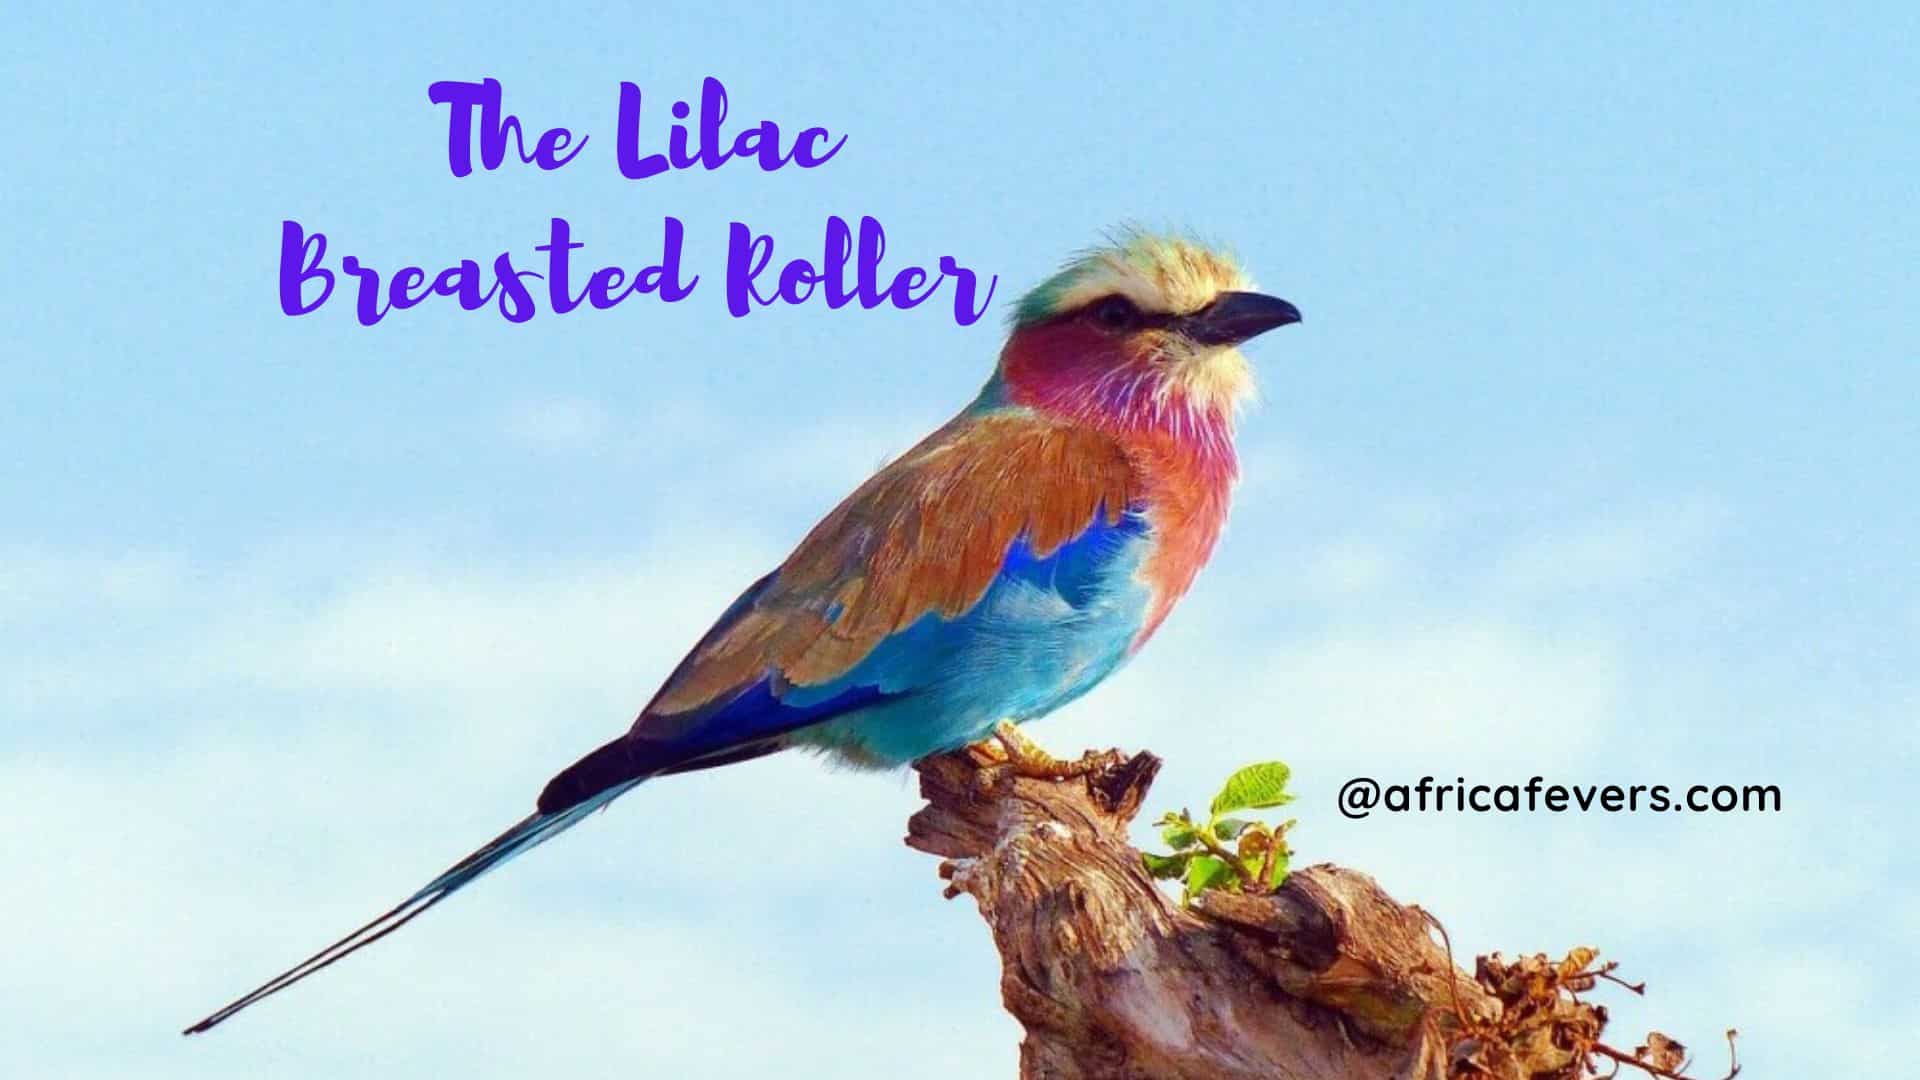 The Lilac Breasted Roller